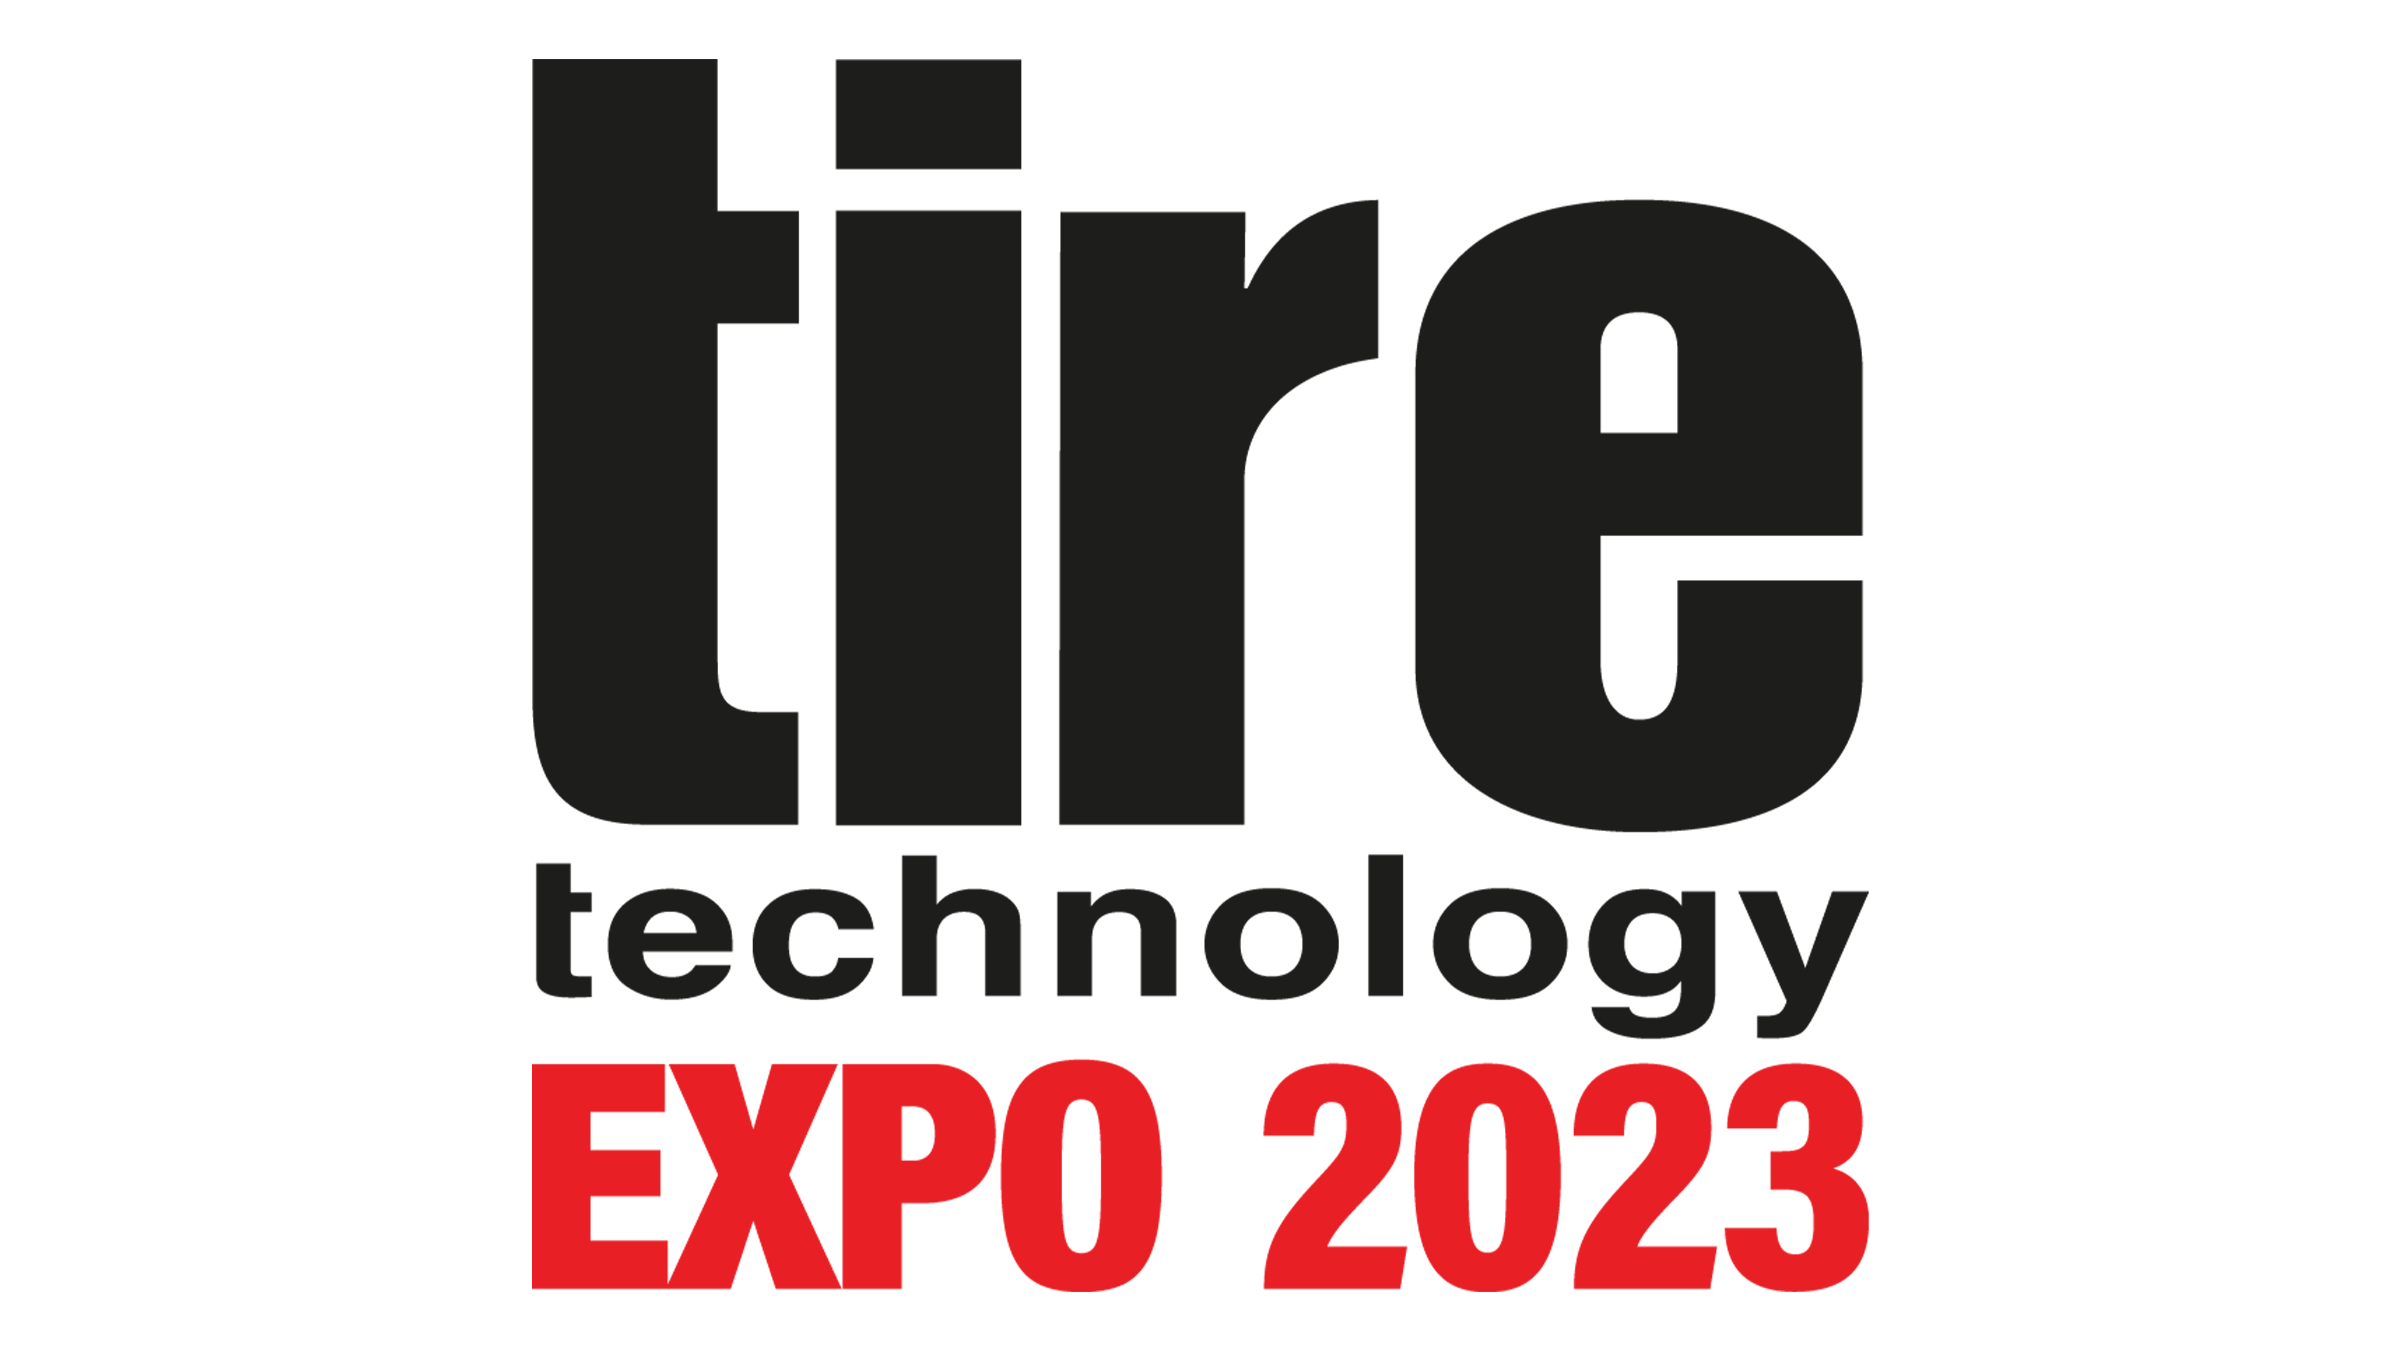 Tire Technology Expo 2023